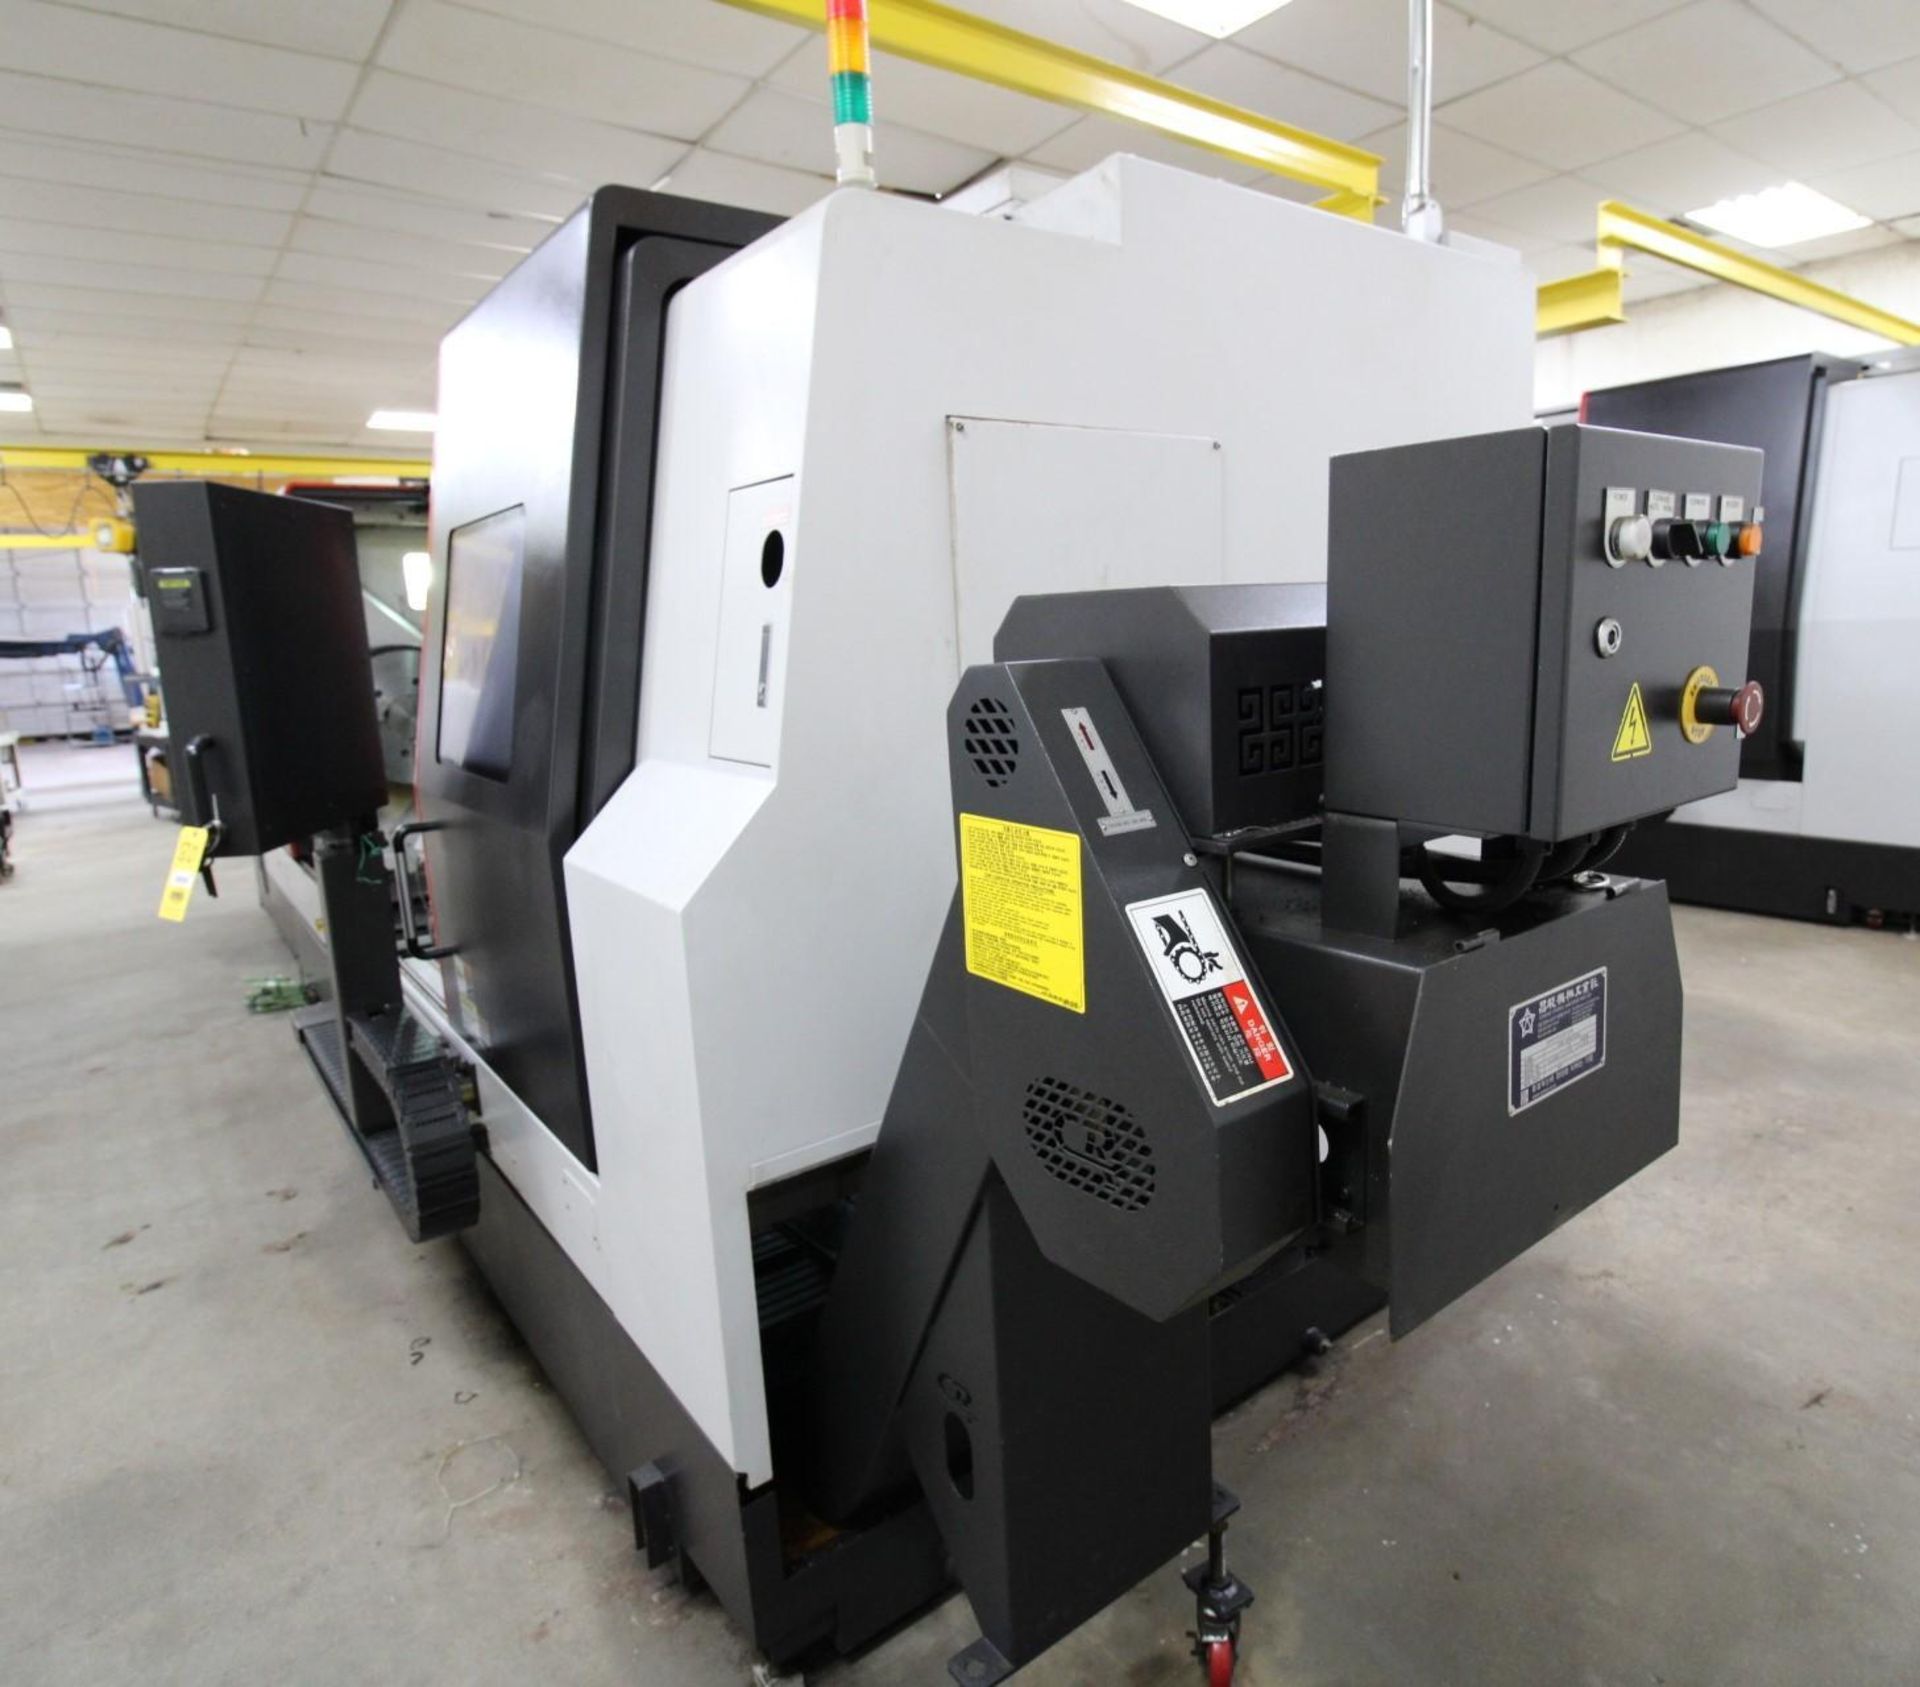 MULTI AXIS CNC MILLING & TURNING CENTER, SAMSUNG MDL. SL-45MC/3000, new 2014, Fanuc Oi-TD control, - Image 4 of 16